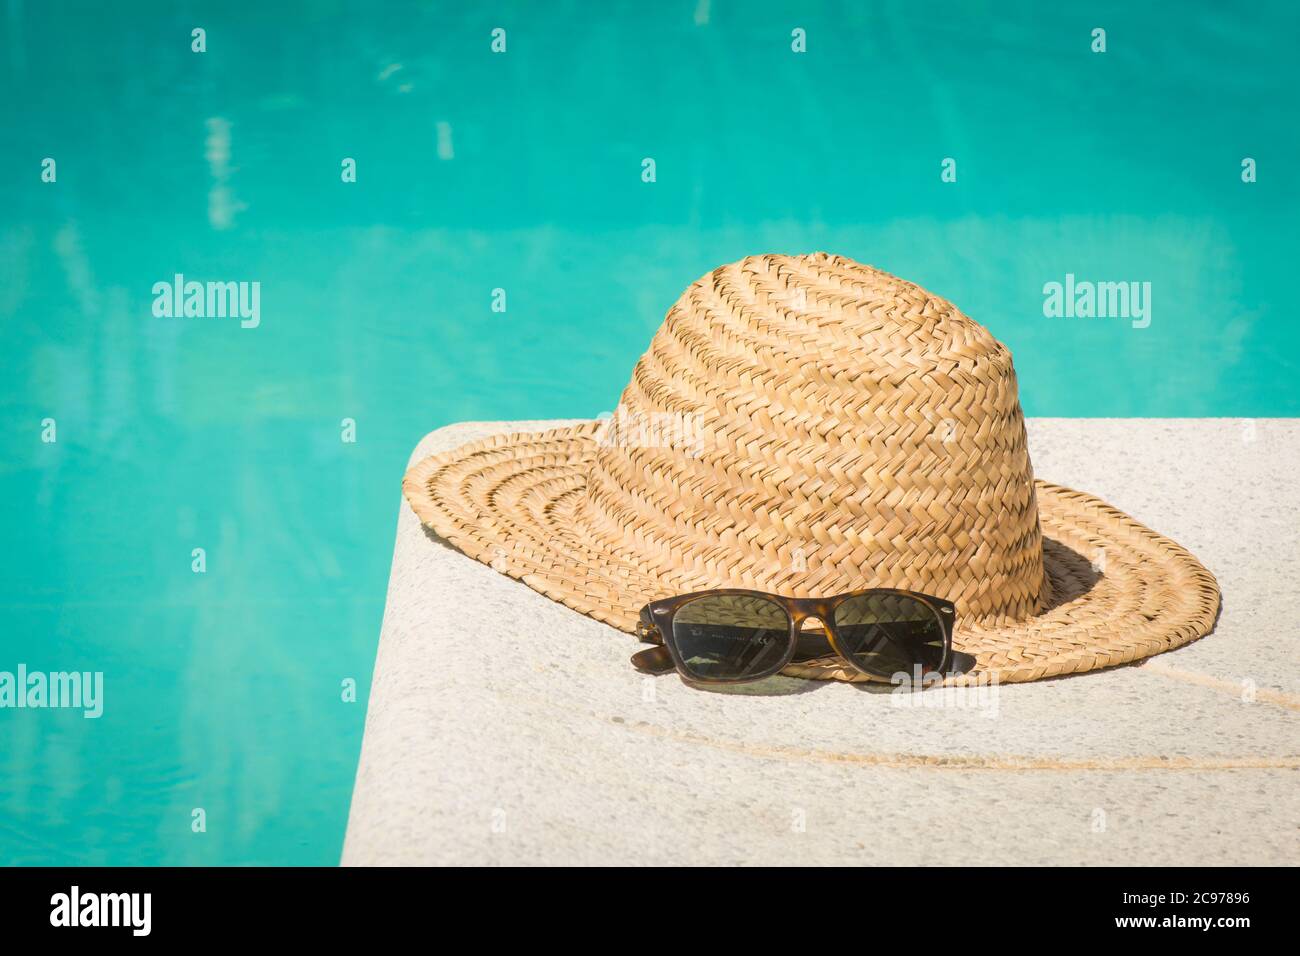 Vintage straw hat with sun glasses at the border of a swimming pool in summer. Stock Photo